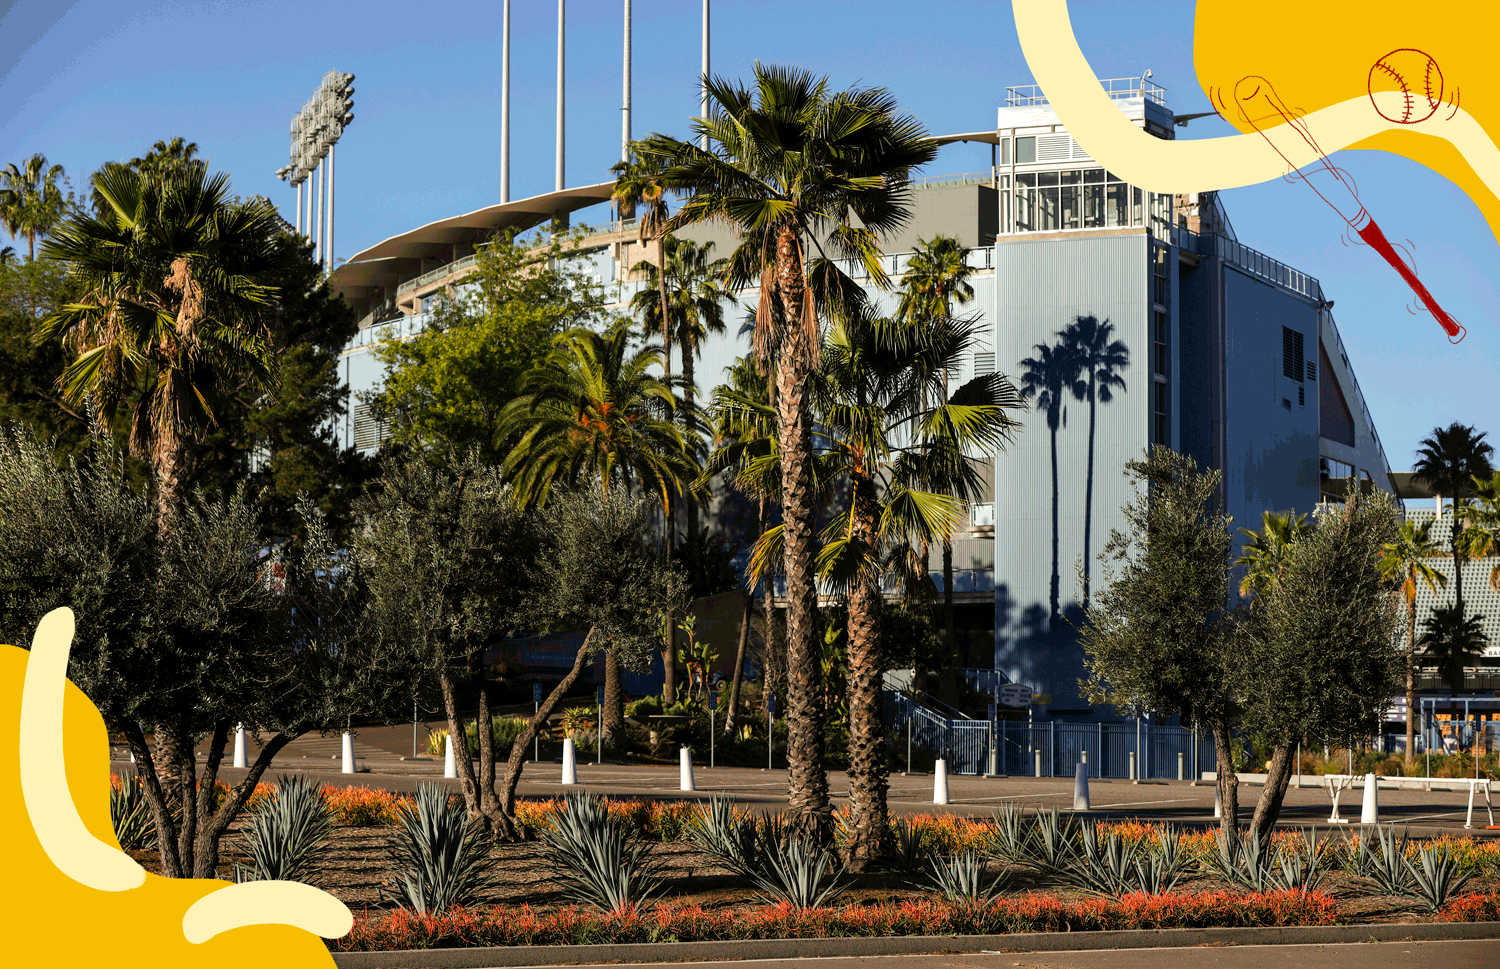 A GIF shows a drawing of a baseball bat and ball atop a photo of an exterior view of Dodger Stadium, with palm trees.